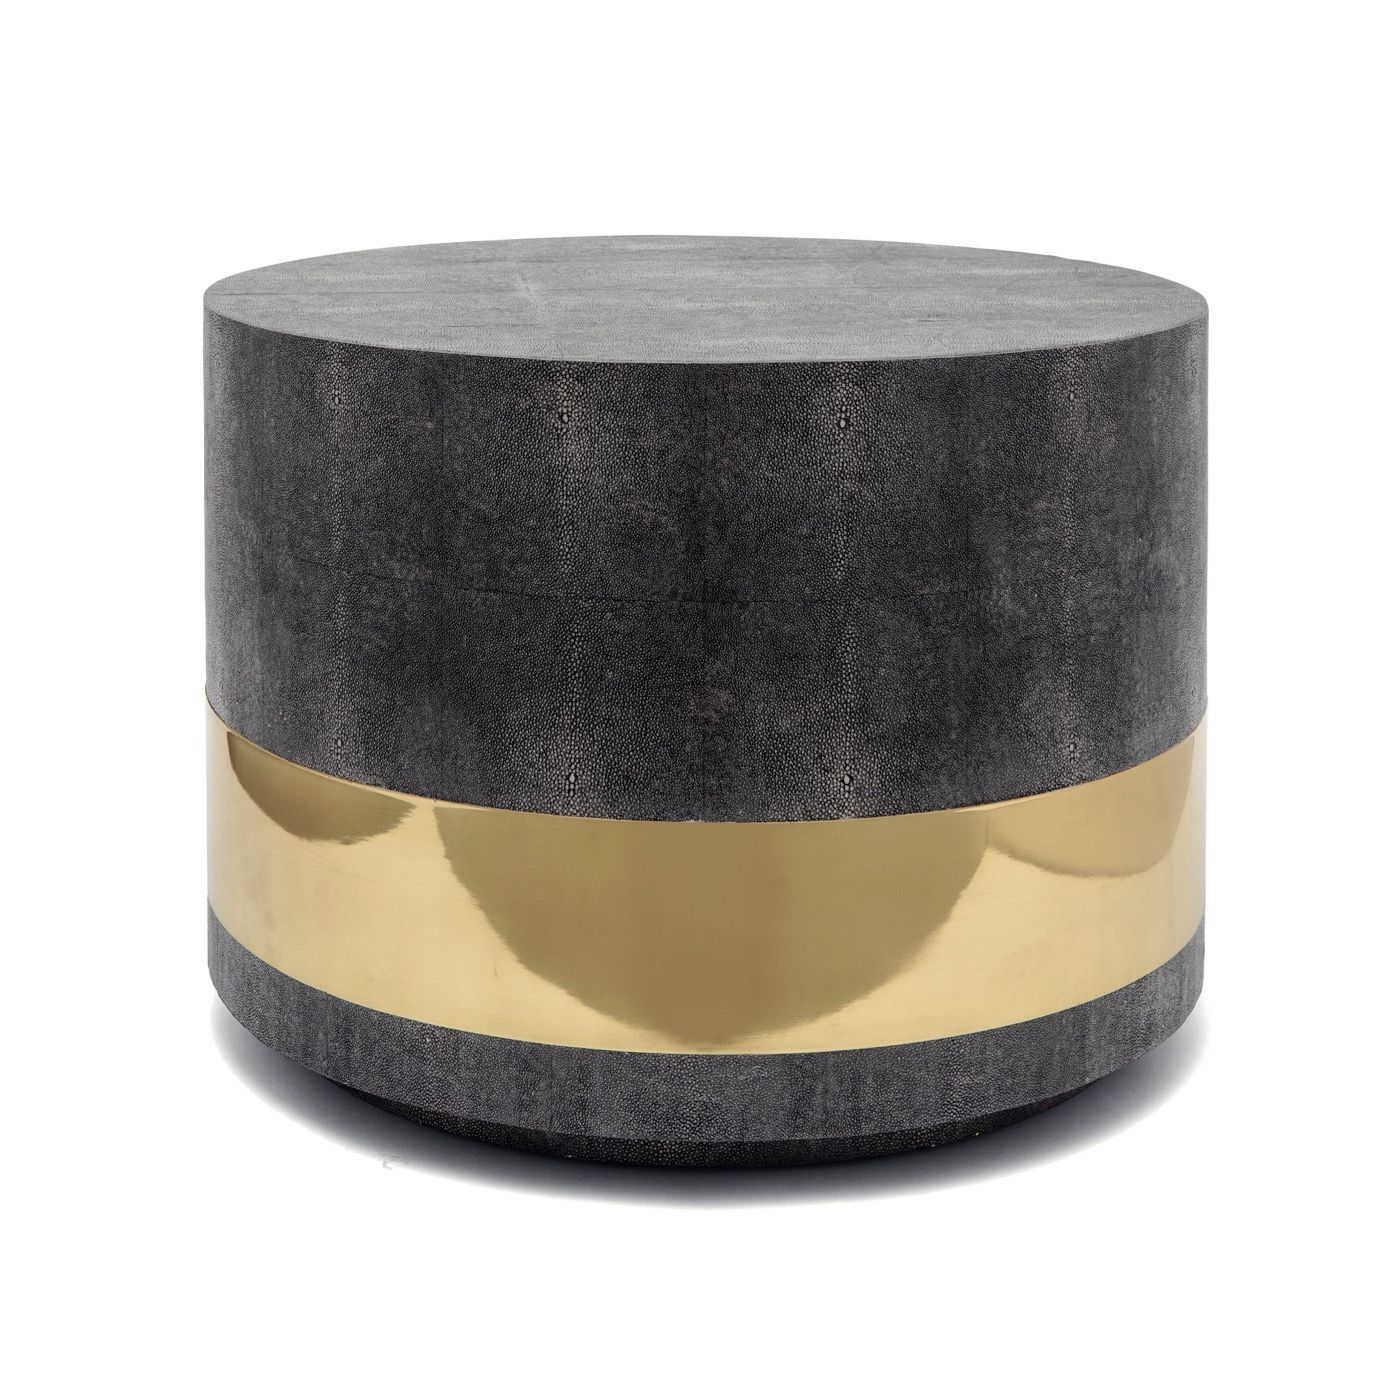 Grey Pertaining To Well Known Lavin Ceramic Garden Stools (View 23 of 30)